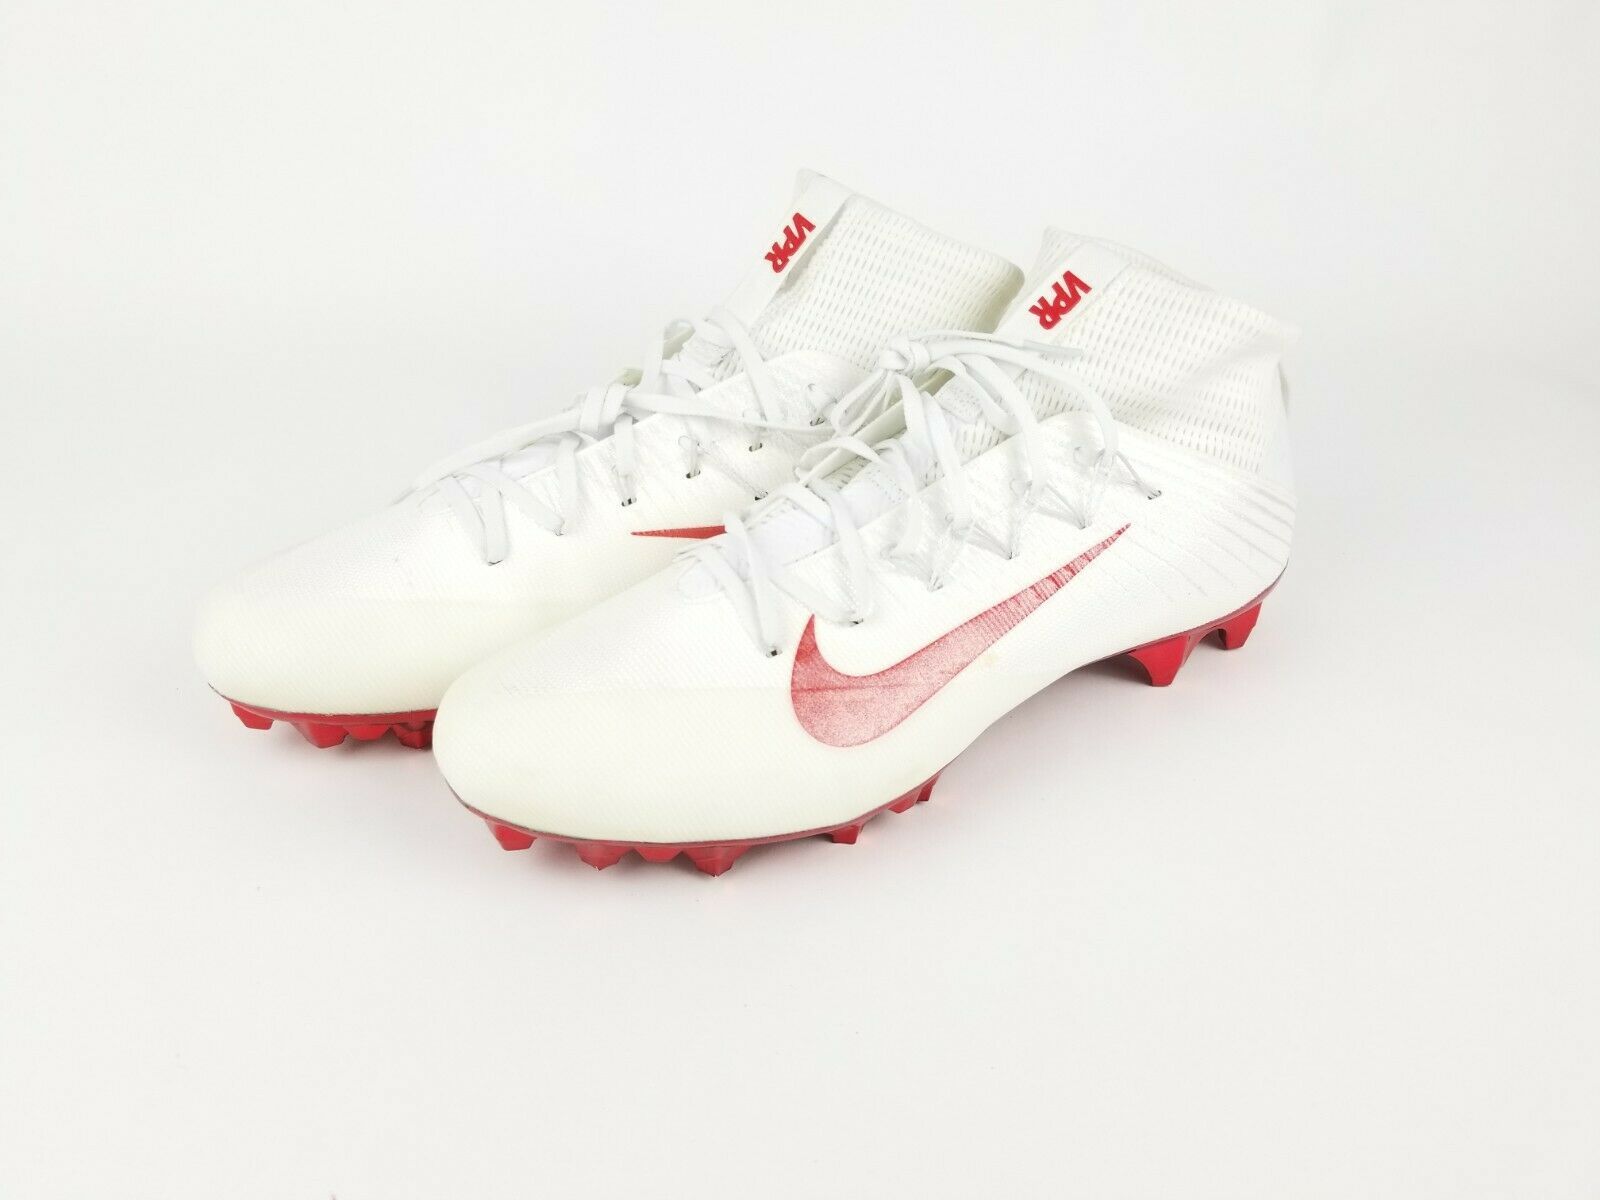 vpr cleats